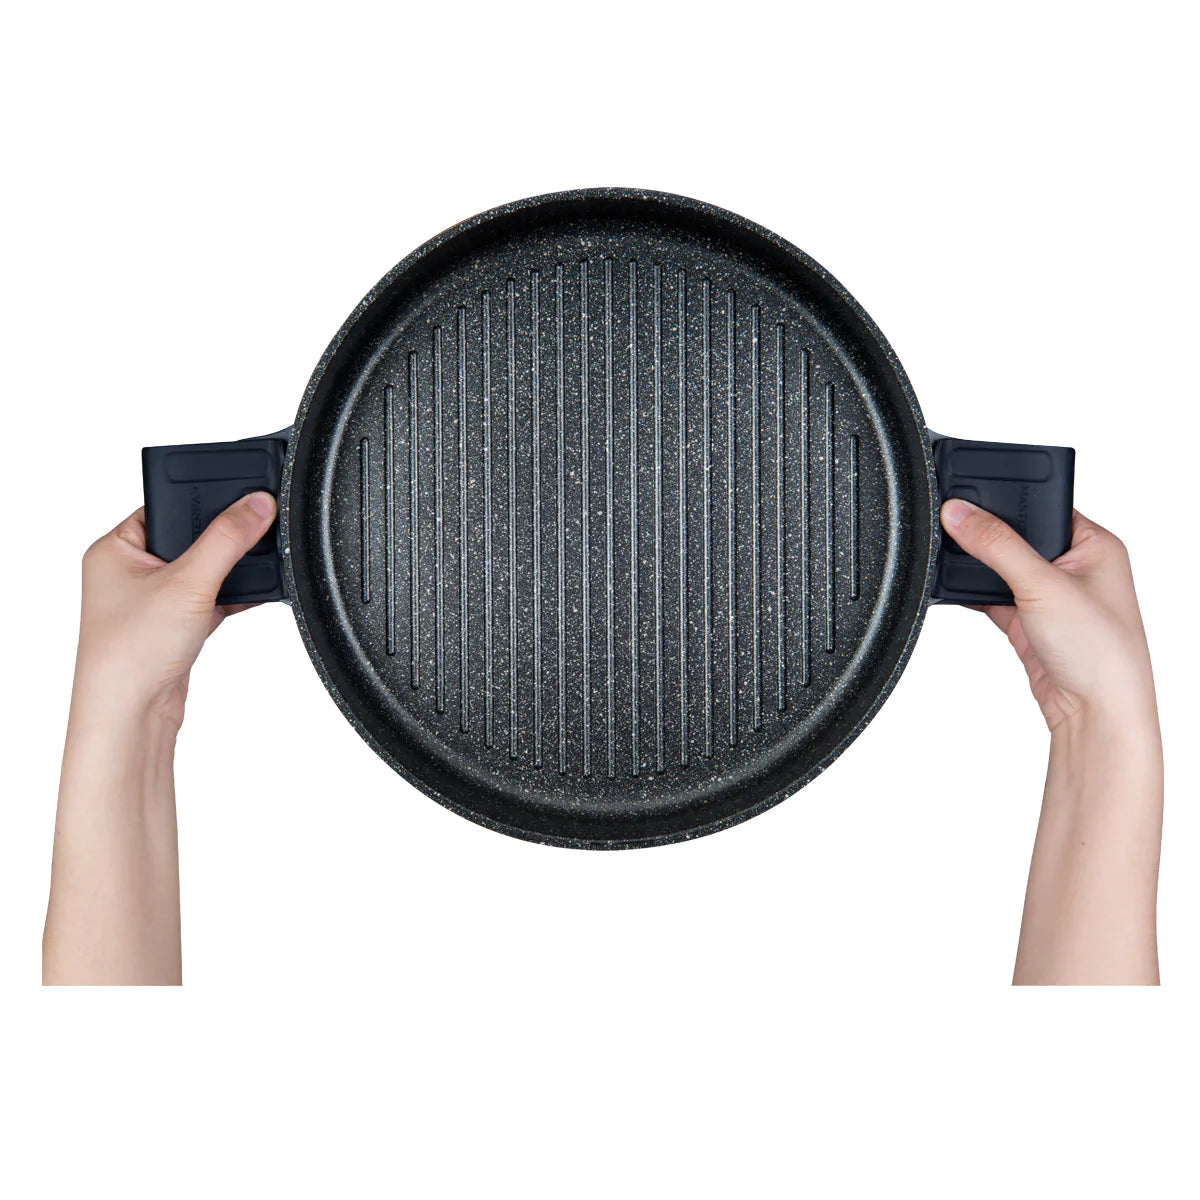 https://kitchenoasis.com/cdn/shop/files/MASTERPAN-Innovative-Series-12-Black-Stovetop-Oven-Grill-Pan-With-Heat-in-Steam-Out-Lid-Non-stick-Cast-Aluminum-9.webp?v=1685841873&width=1445